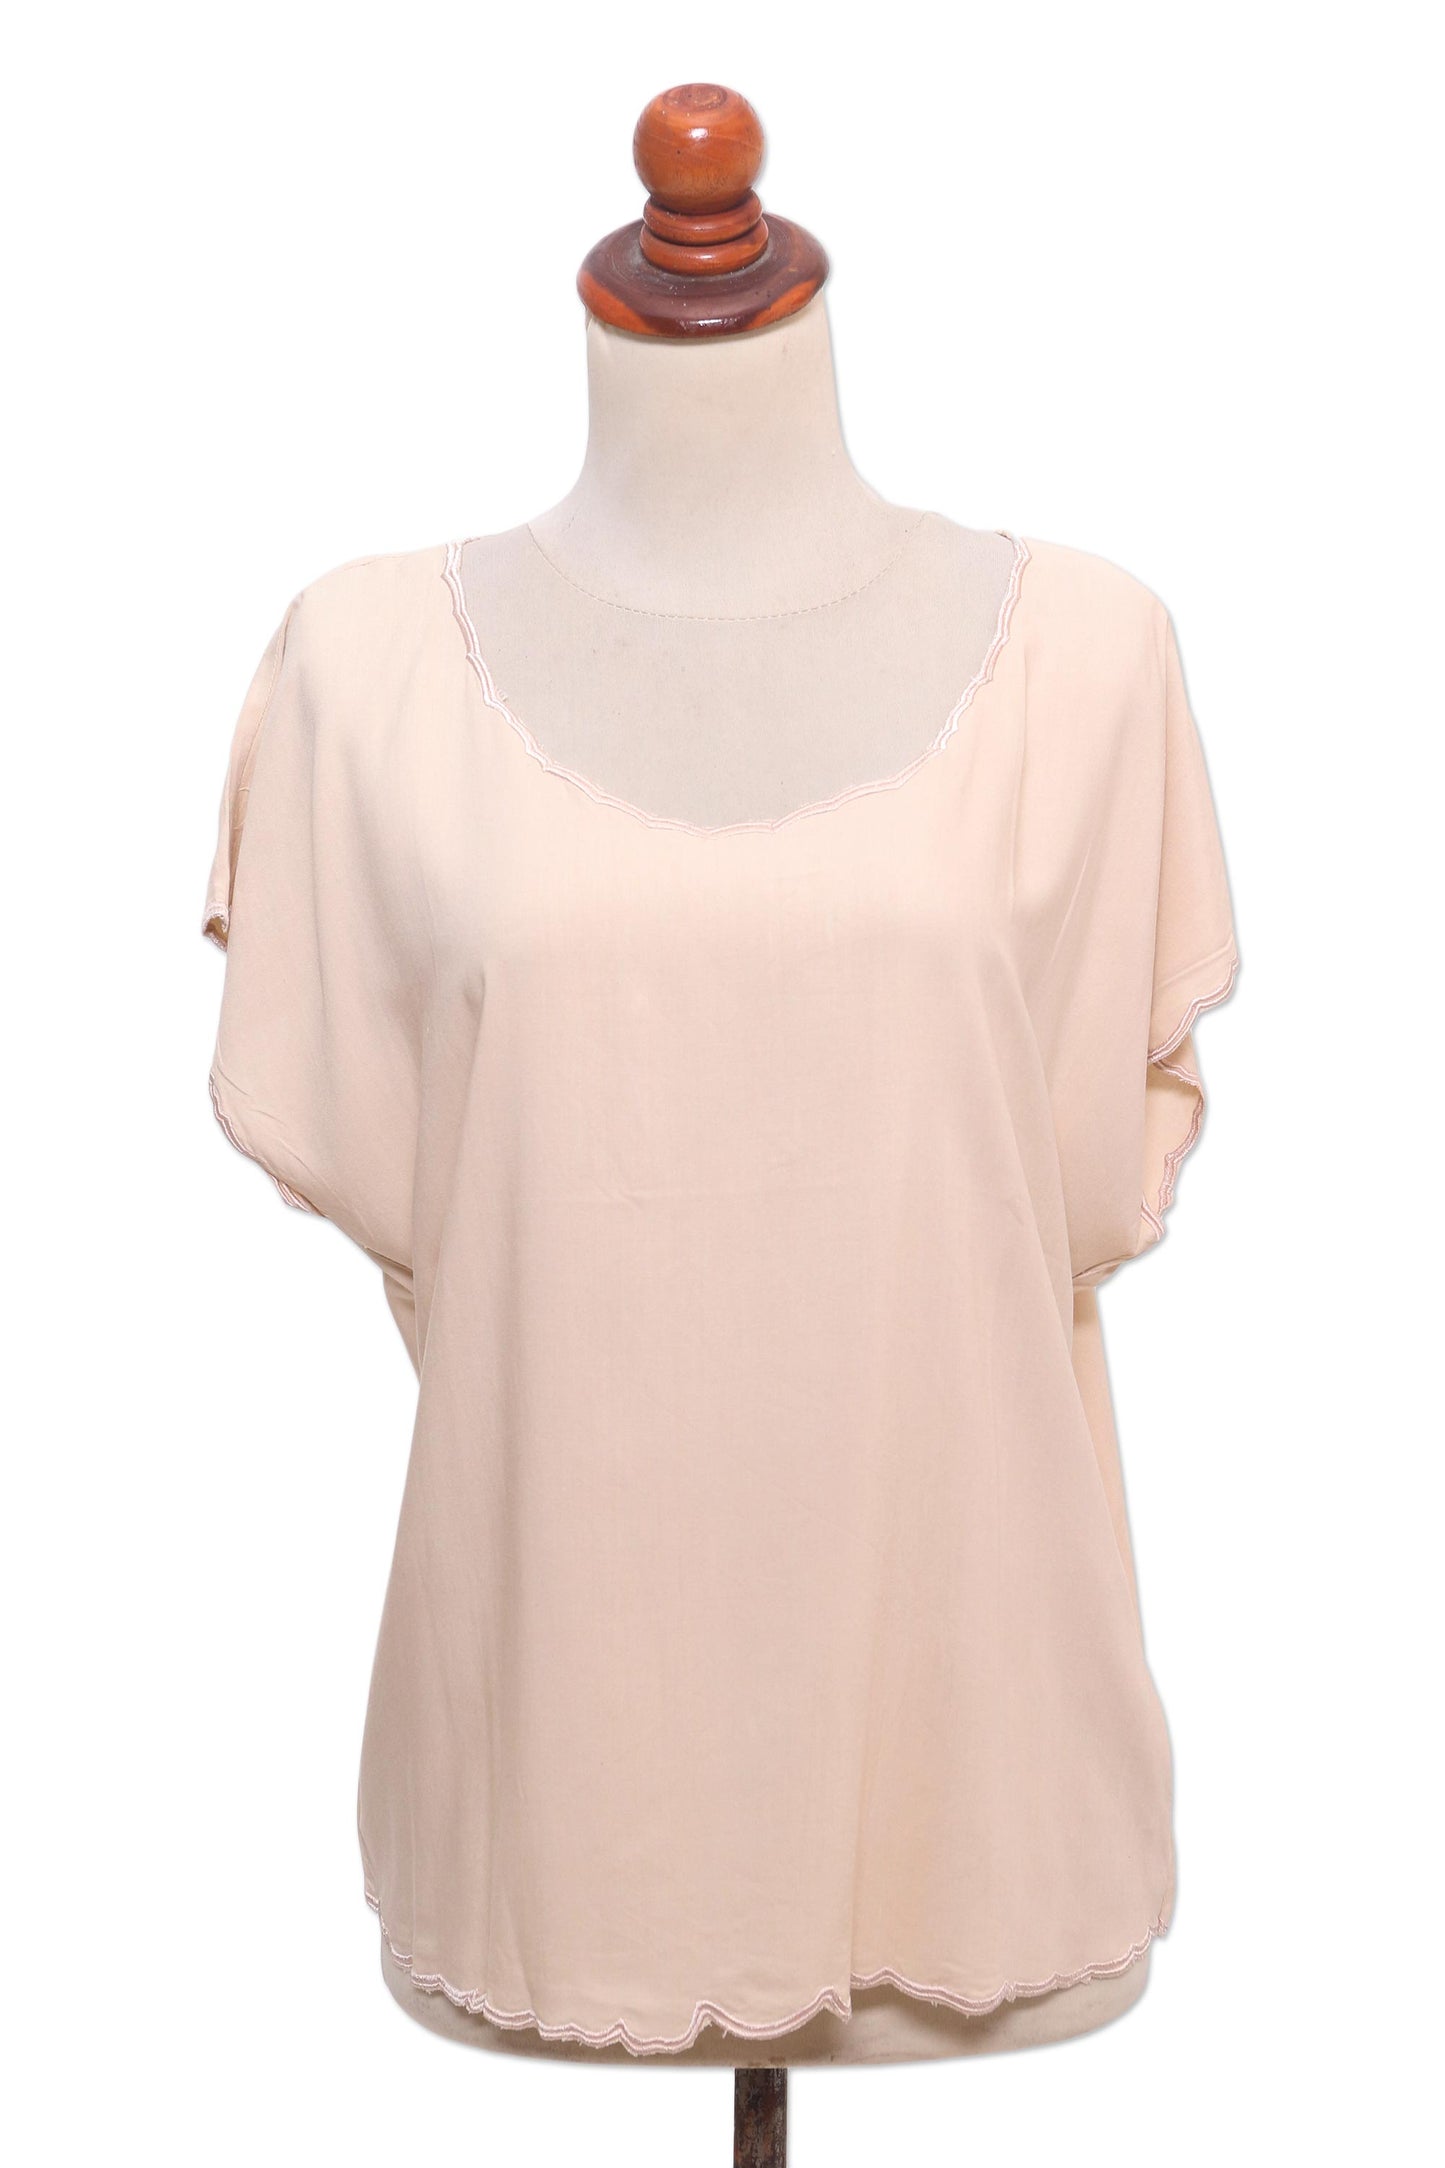 Timeless Tee in Ivory Ivory Short-Sleeved Rayon Blouse